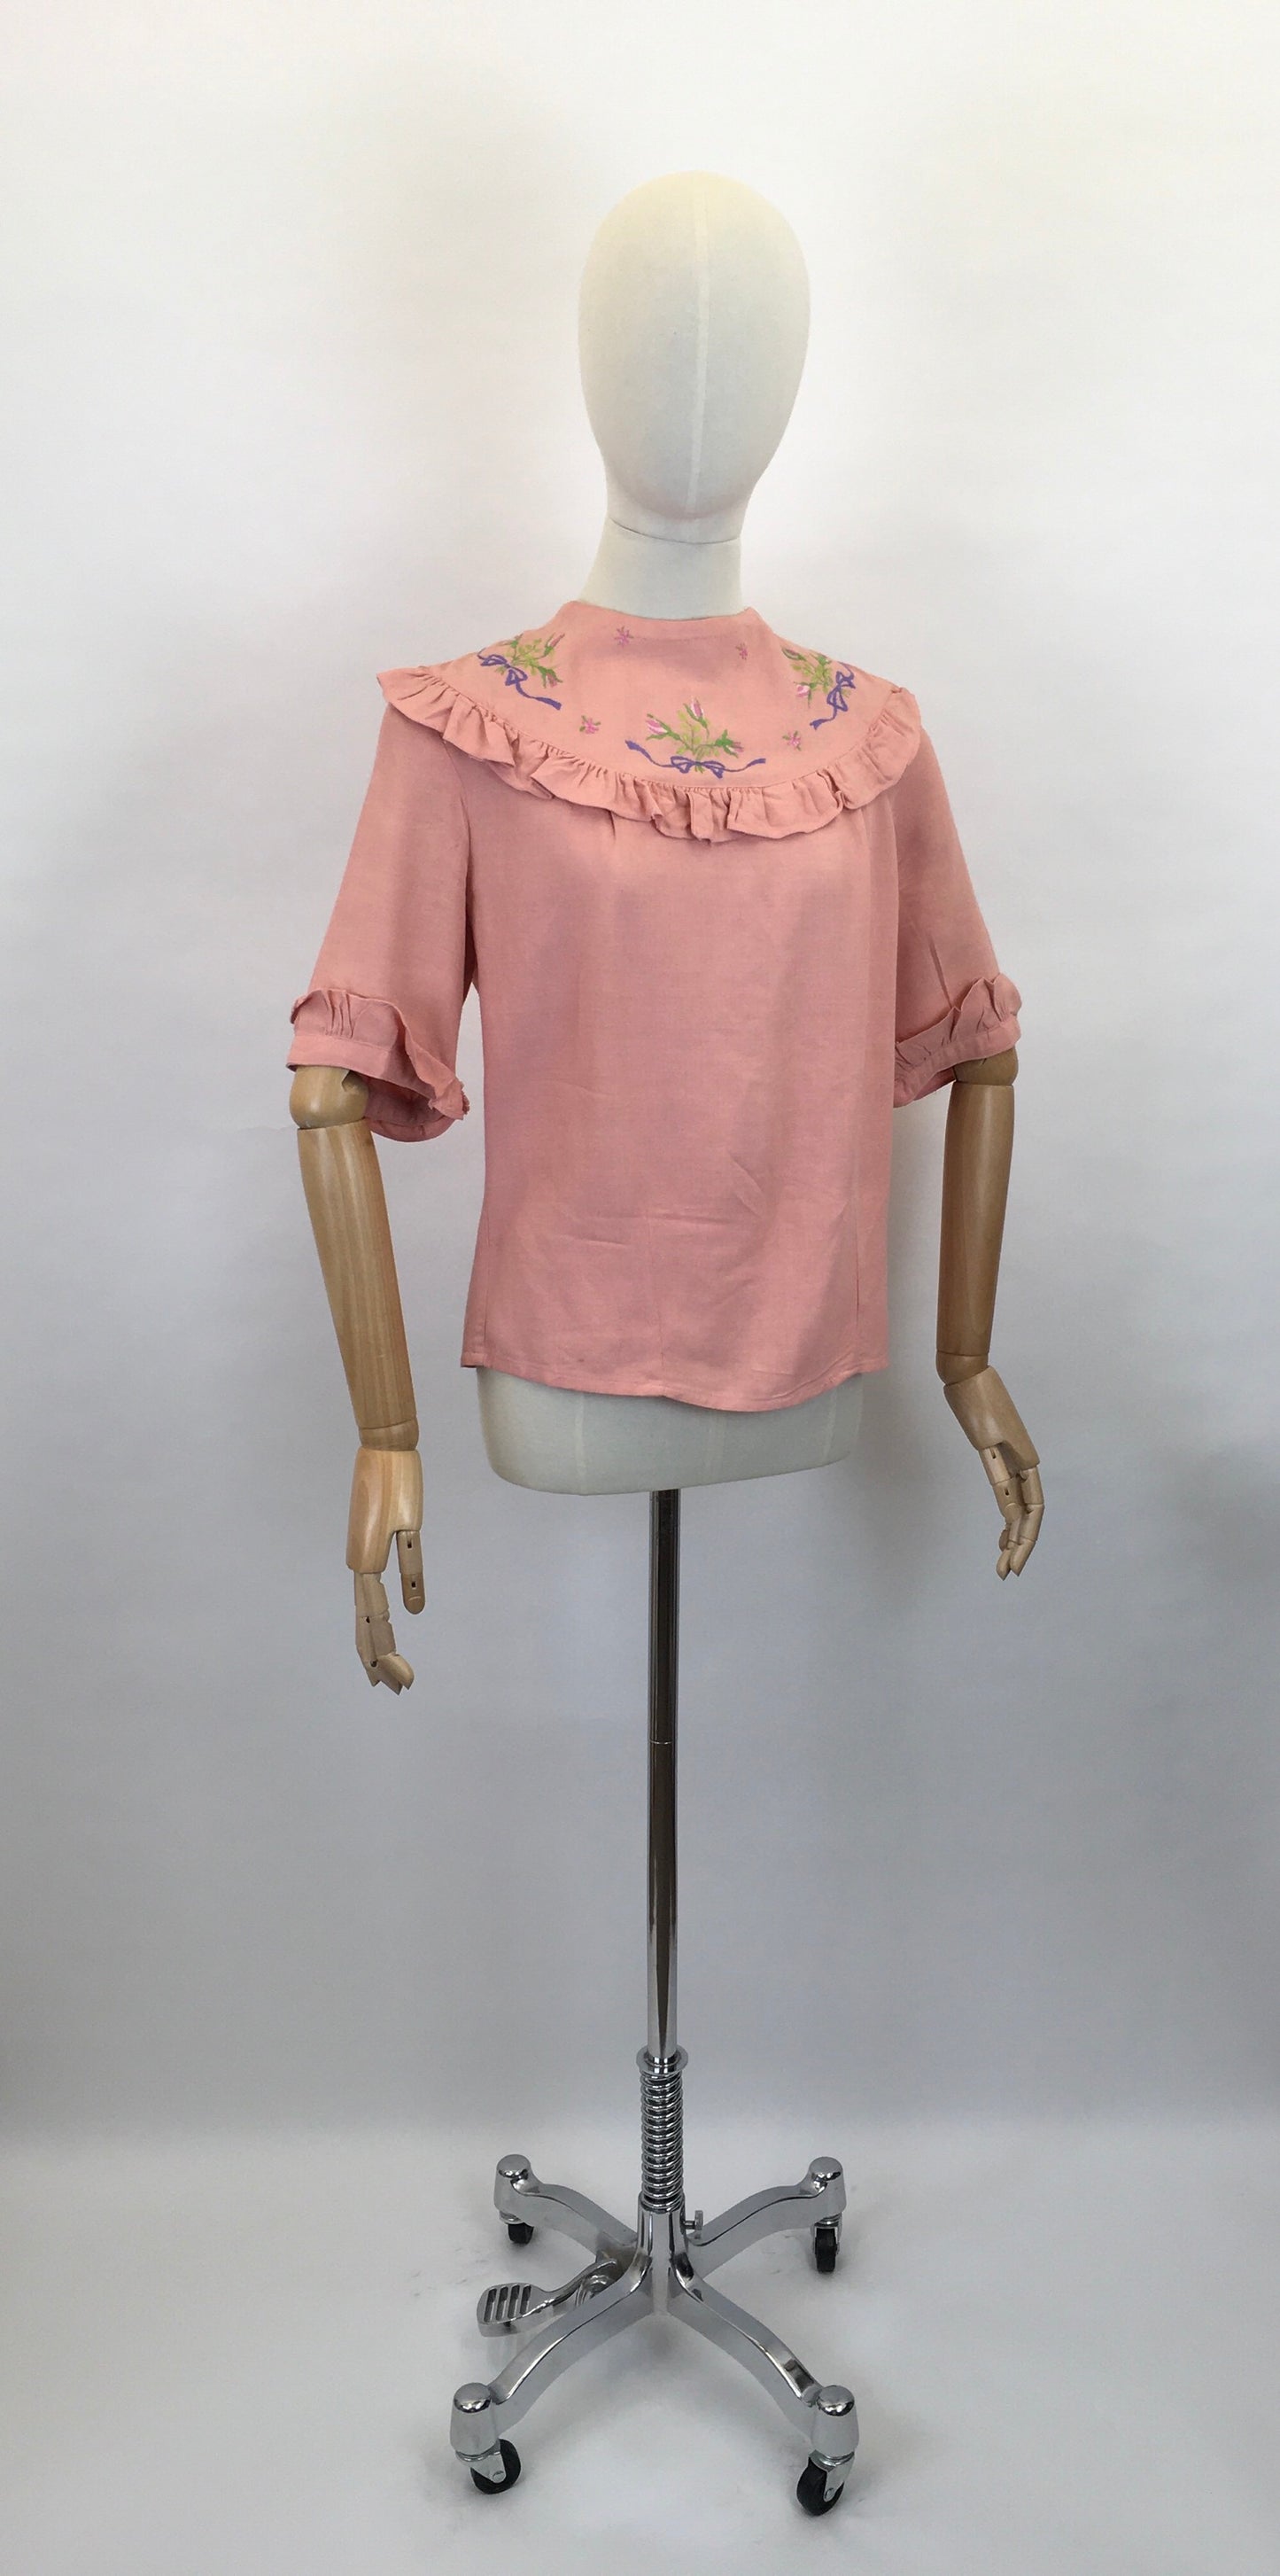 Original 1940s Linen Blouse - In A Beautiful Rose Pink with Floral Embroidery and Pleated Edge